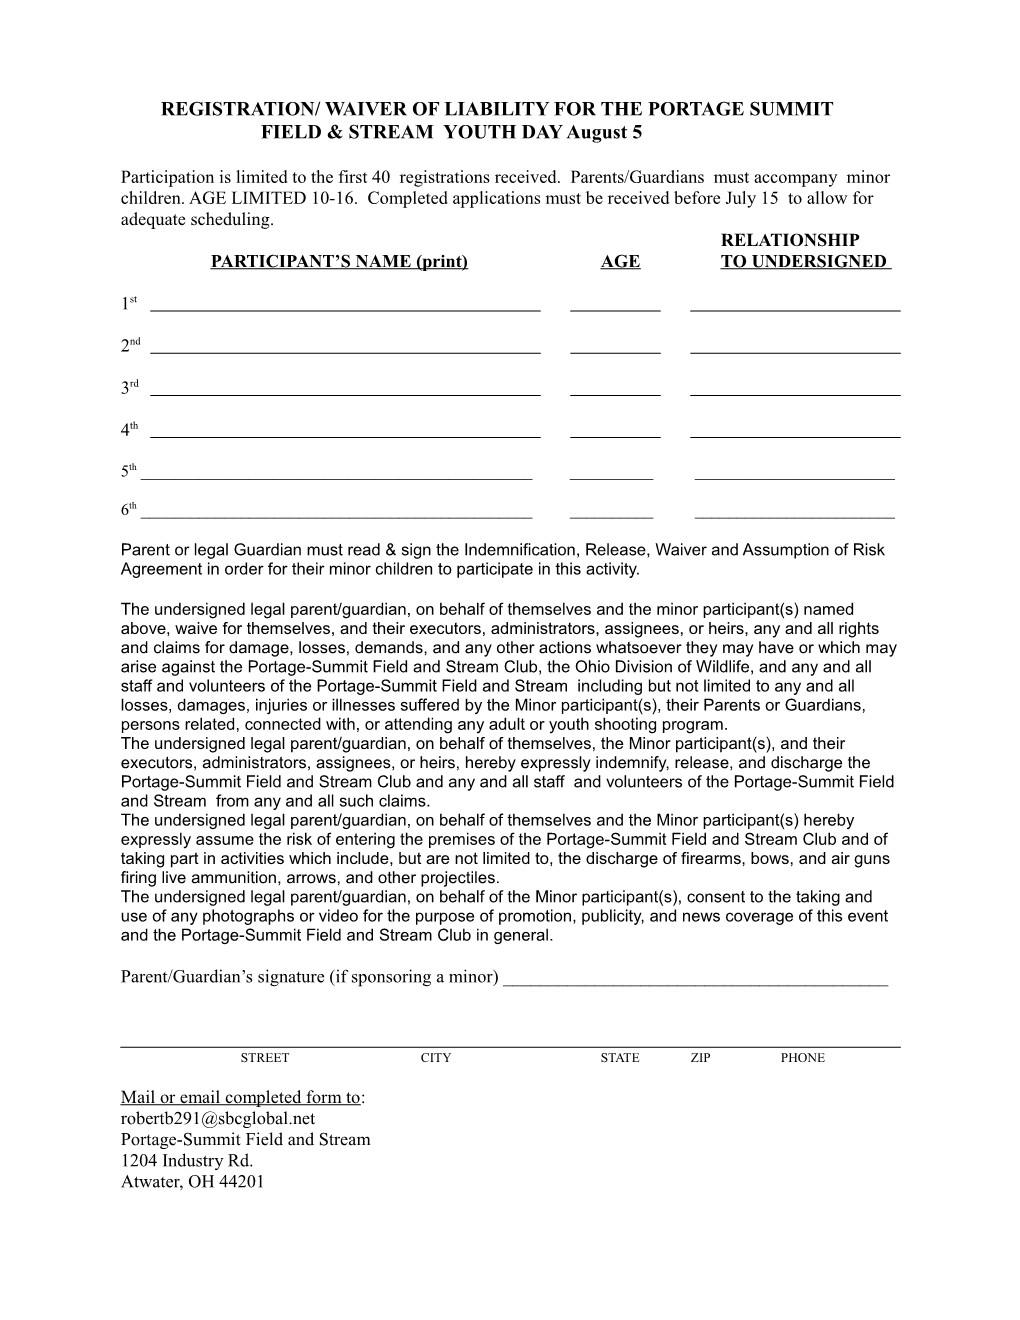 Registration/ Waiver of Liability for the Portage Summit